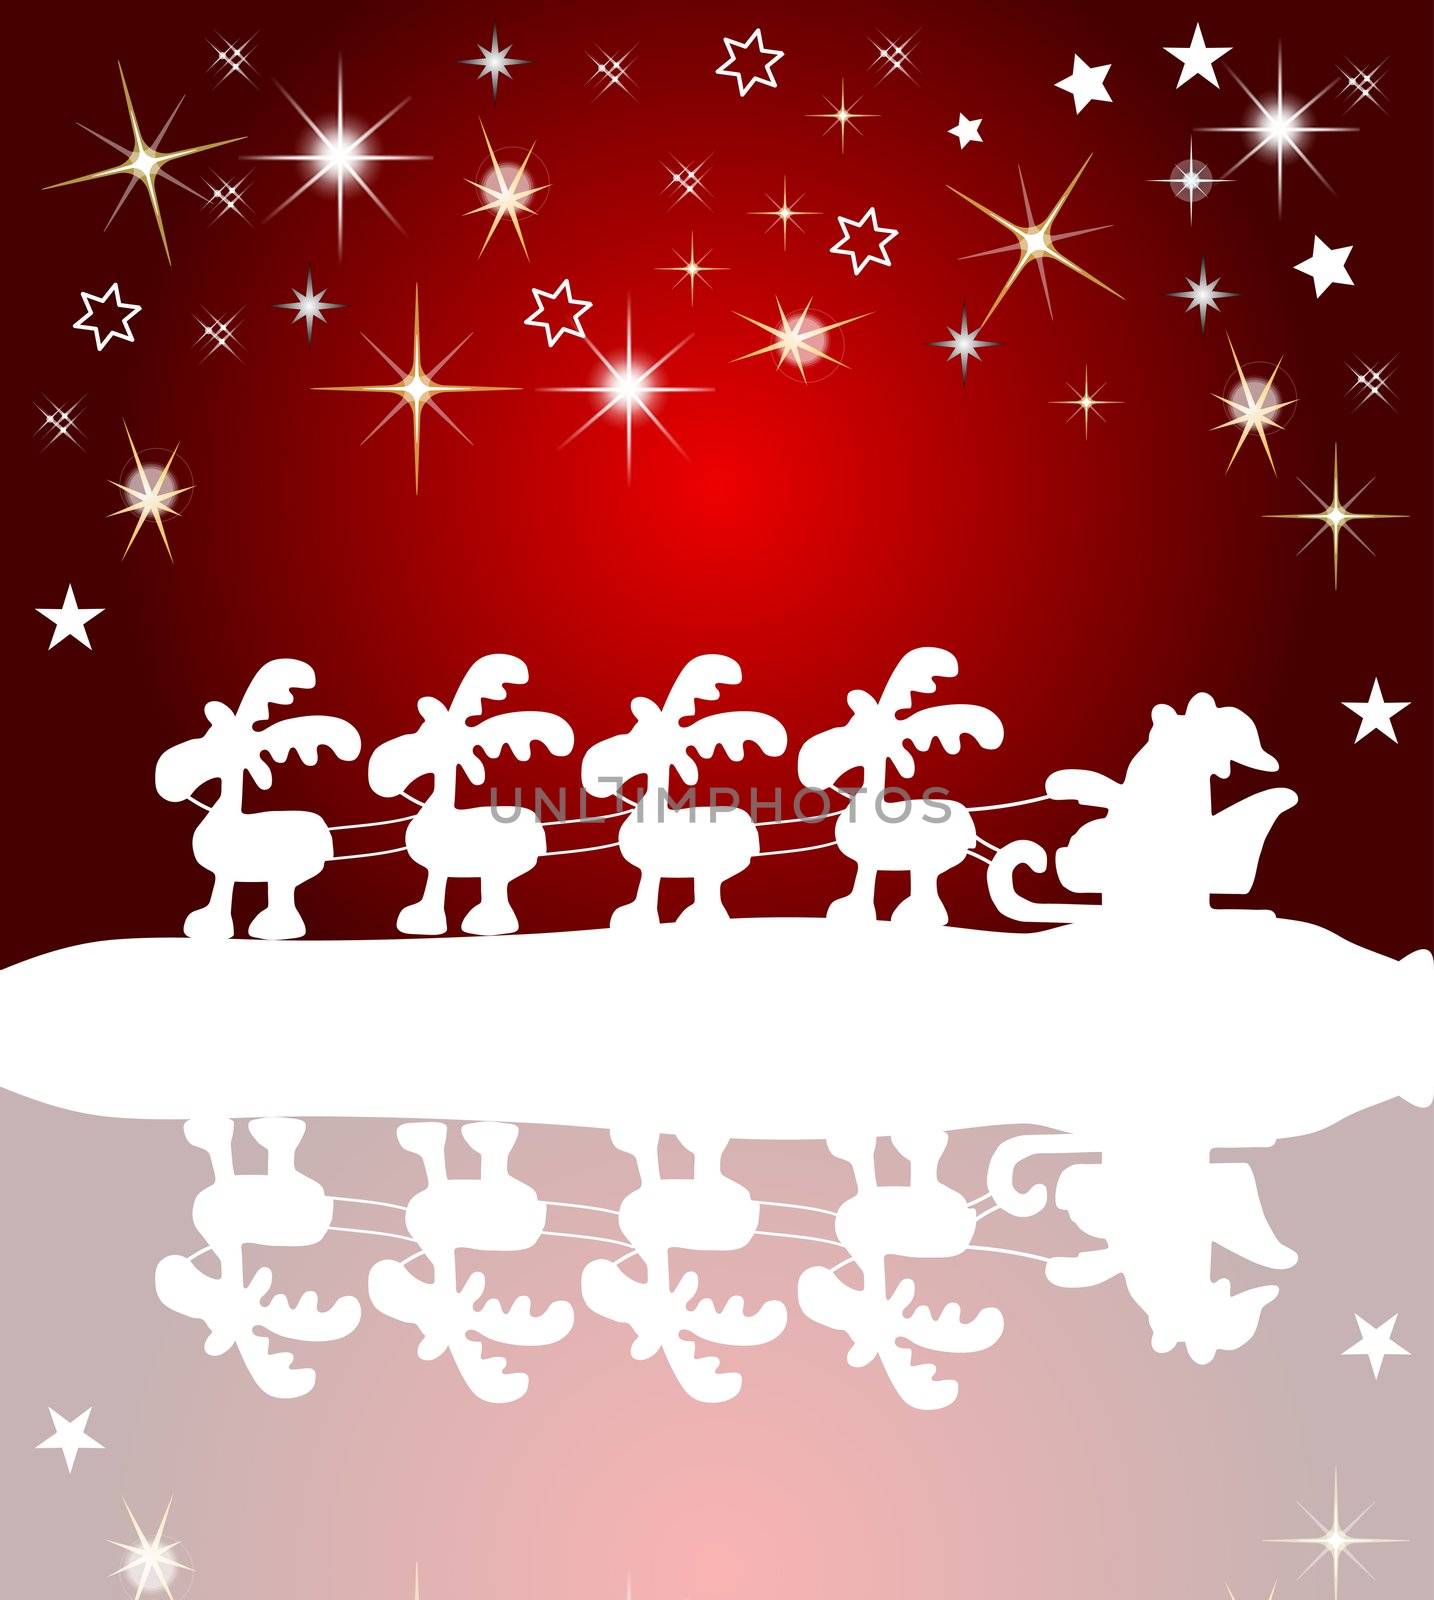 santa claus silhouette with stars and reflection by peromarketing